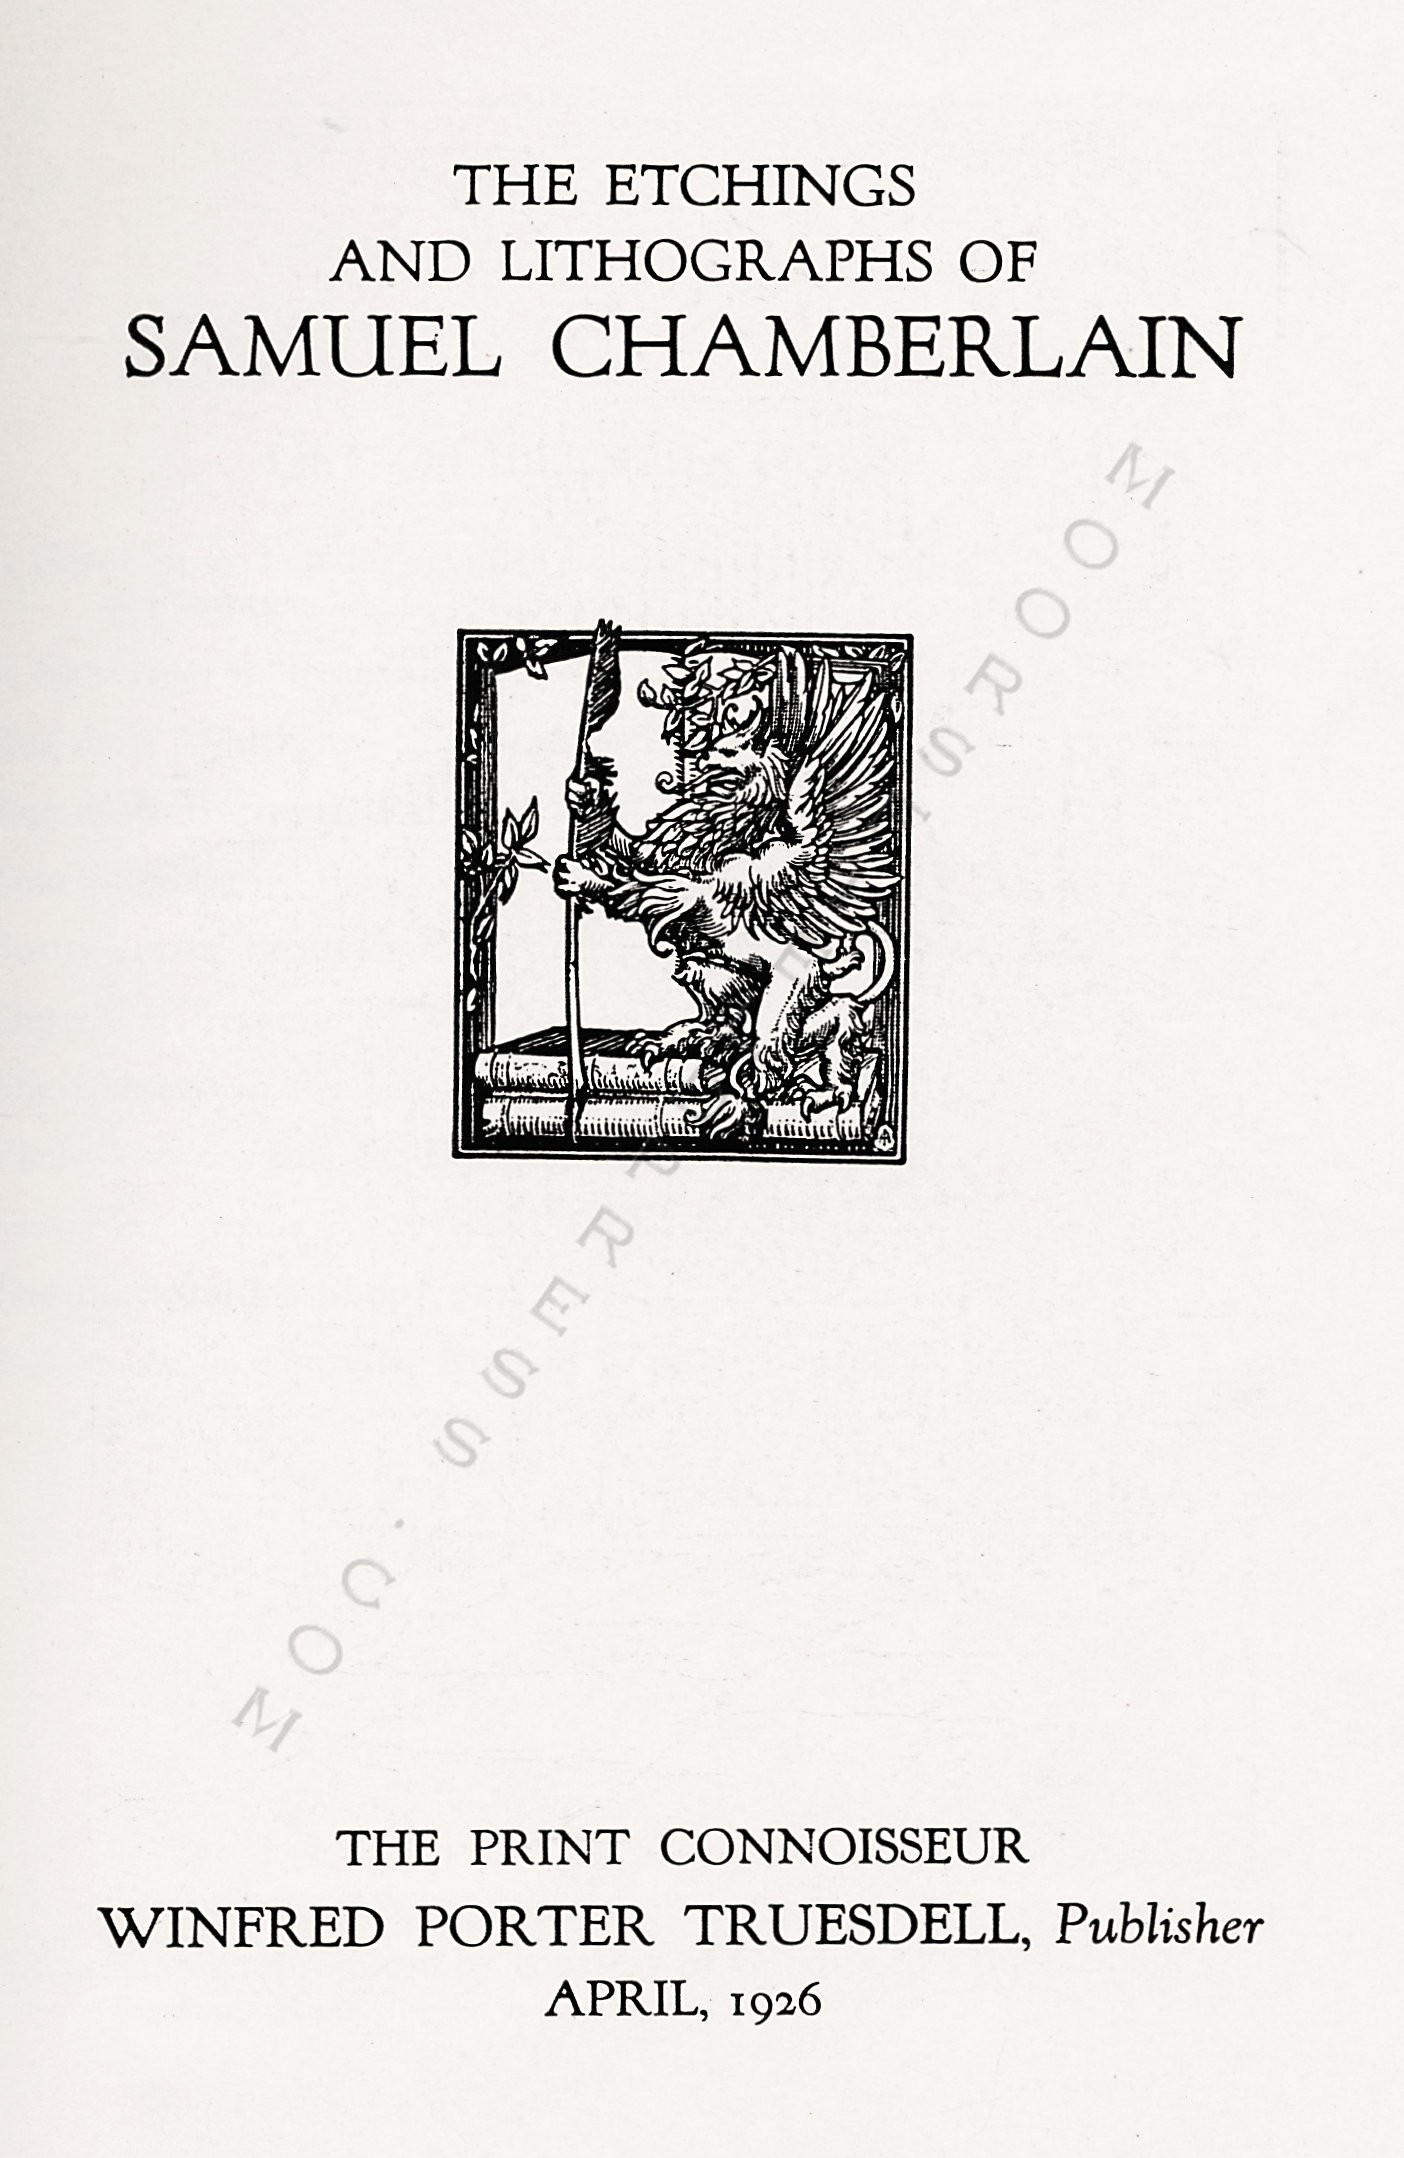 The Print
                      Connoisseur by Winfred Porter Truesdell printed by
                      the Moorsfield Press-April 1926